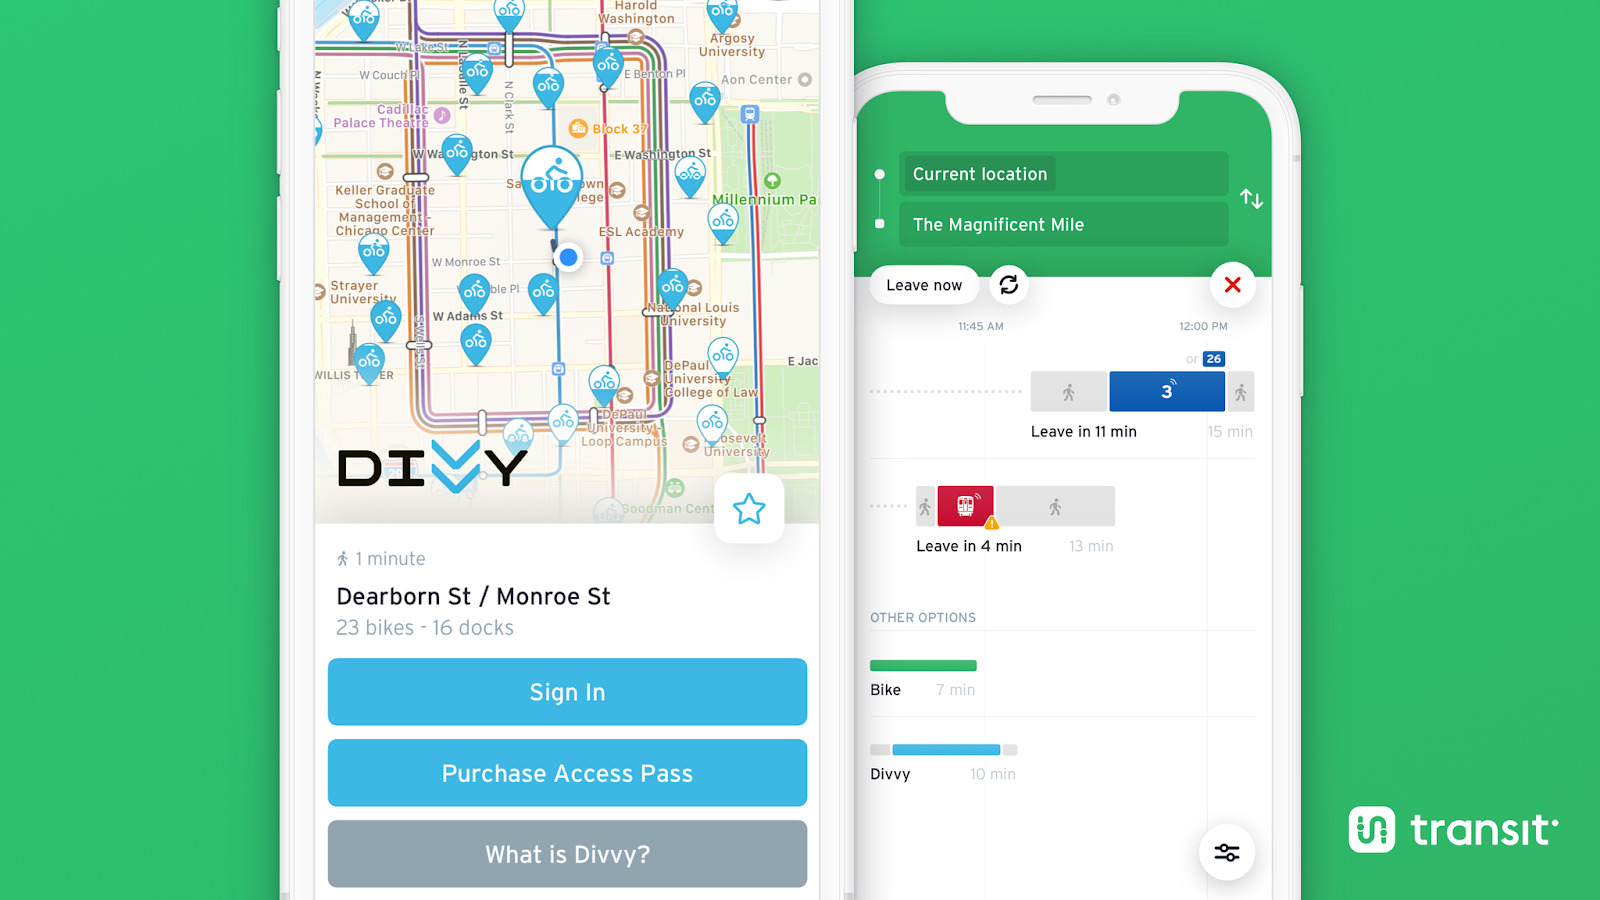 image of Unlocking a Divvy shared bike and trip planning in the Transit app (Chicago)